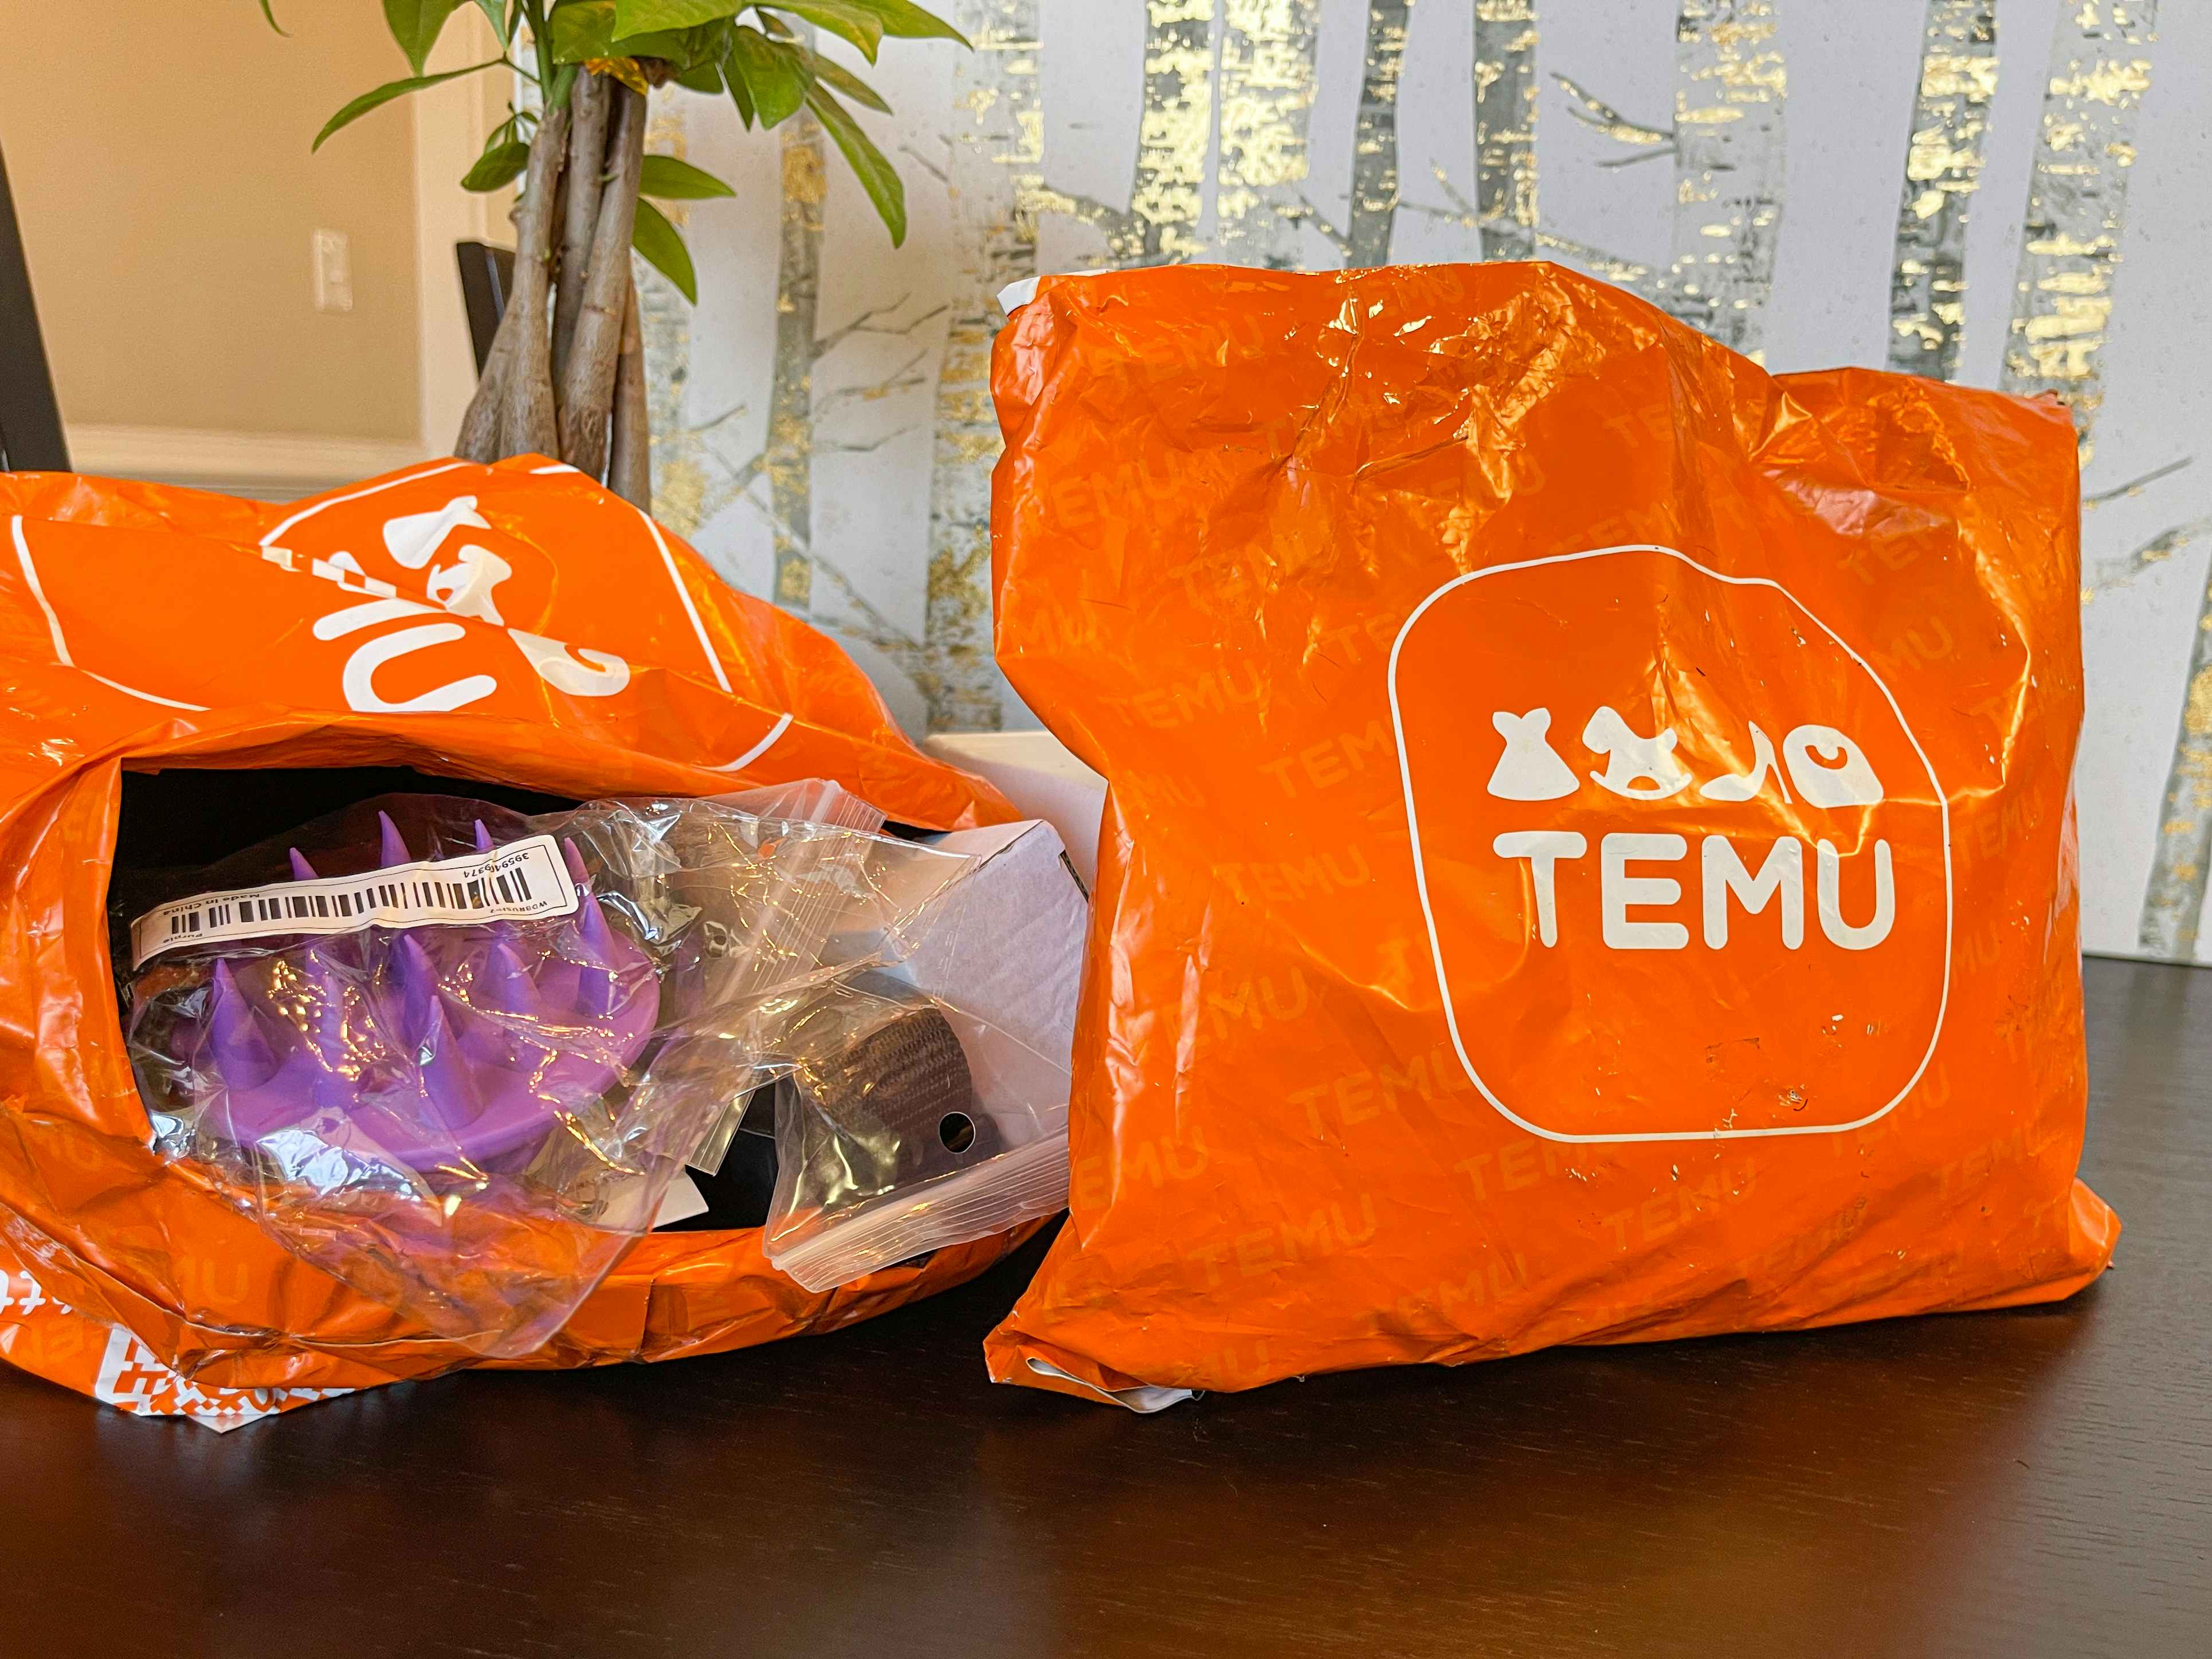 An orange Temu shipping package sitting upright on a table next to an opened Temu shipping package with items spilling out